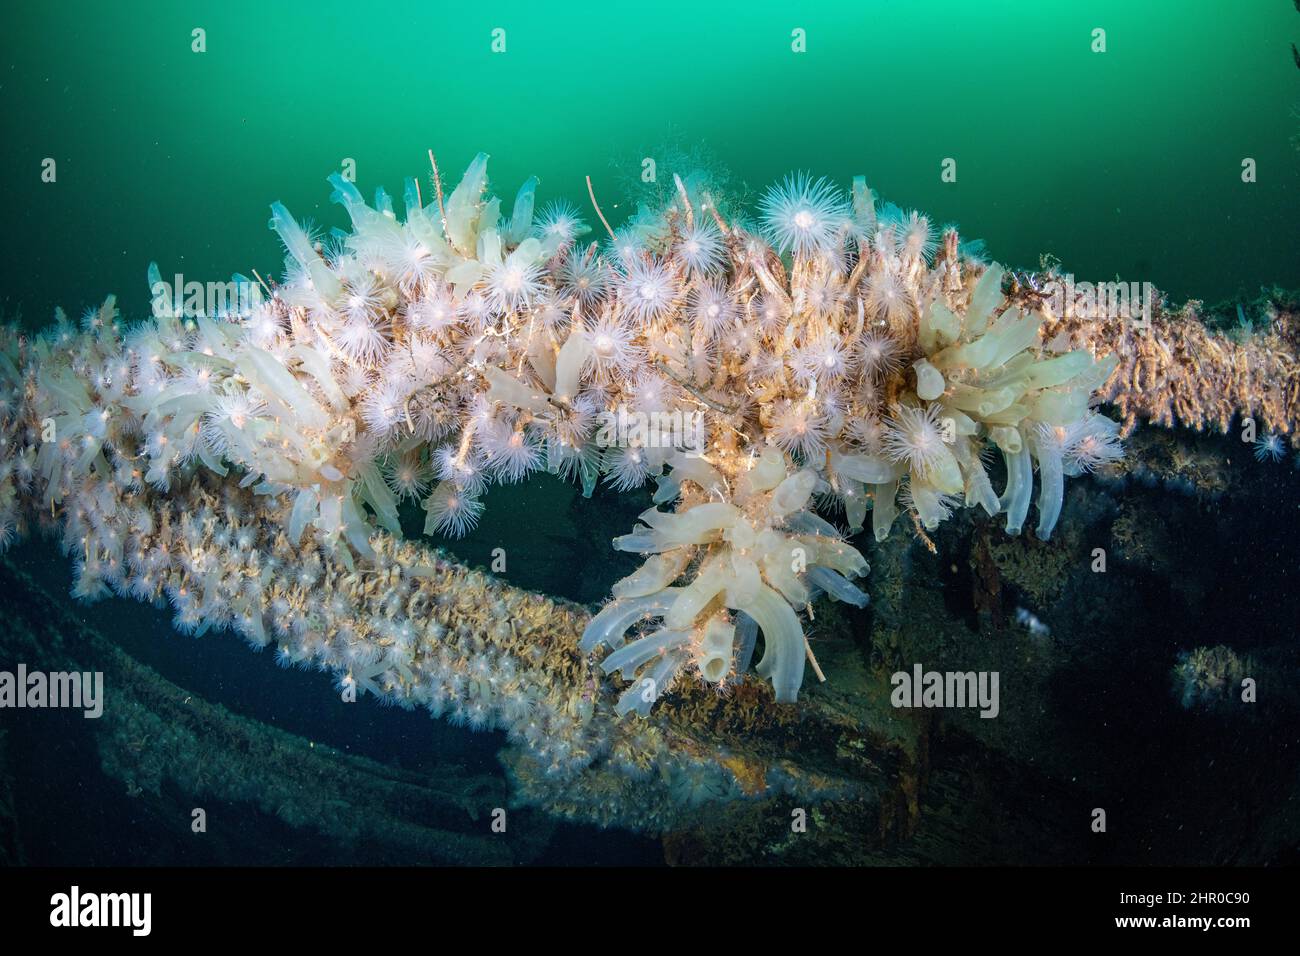 Sea squirts, (Ciona intestinalis) and (Protanthea simplex) is a species of sea anemone found in deep water. Flatanger, coastal commune in central Norw Stock Photo